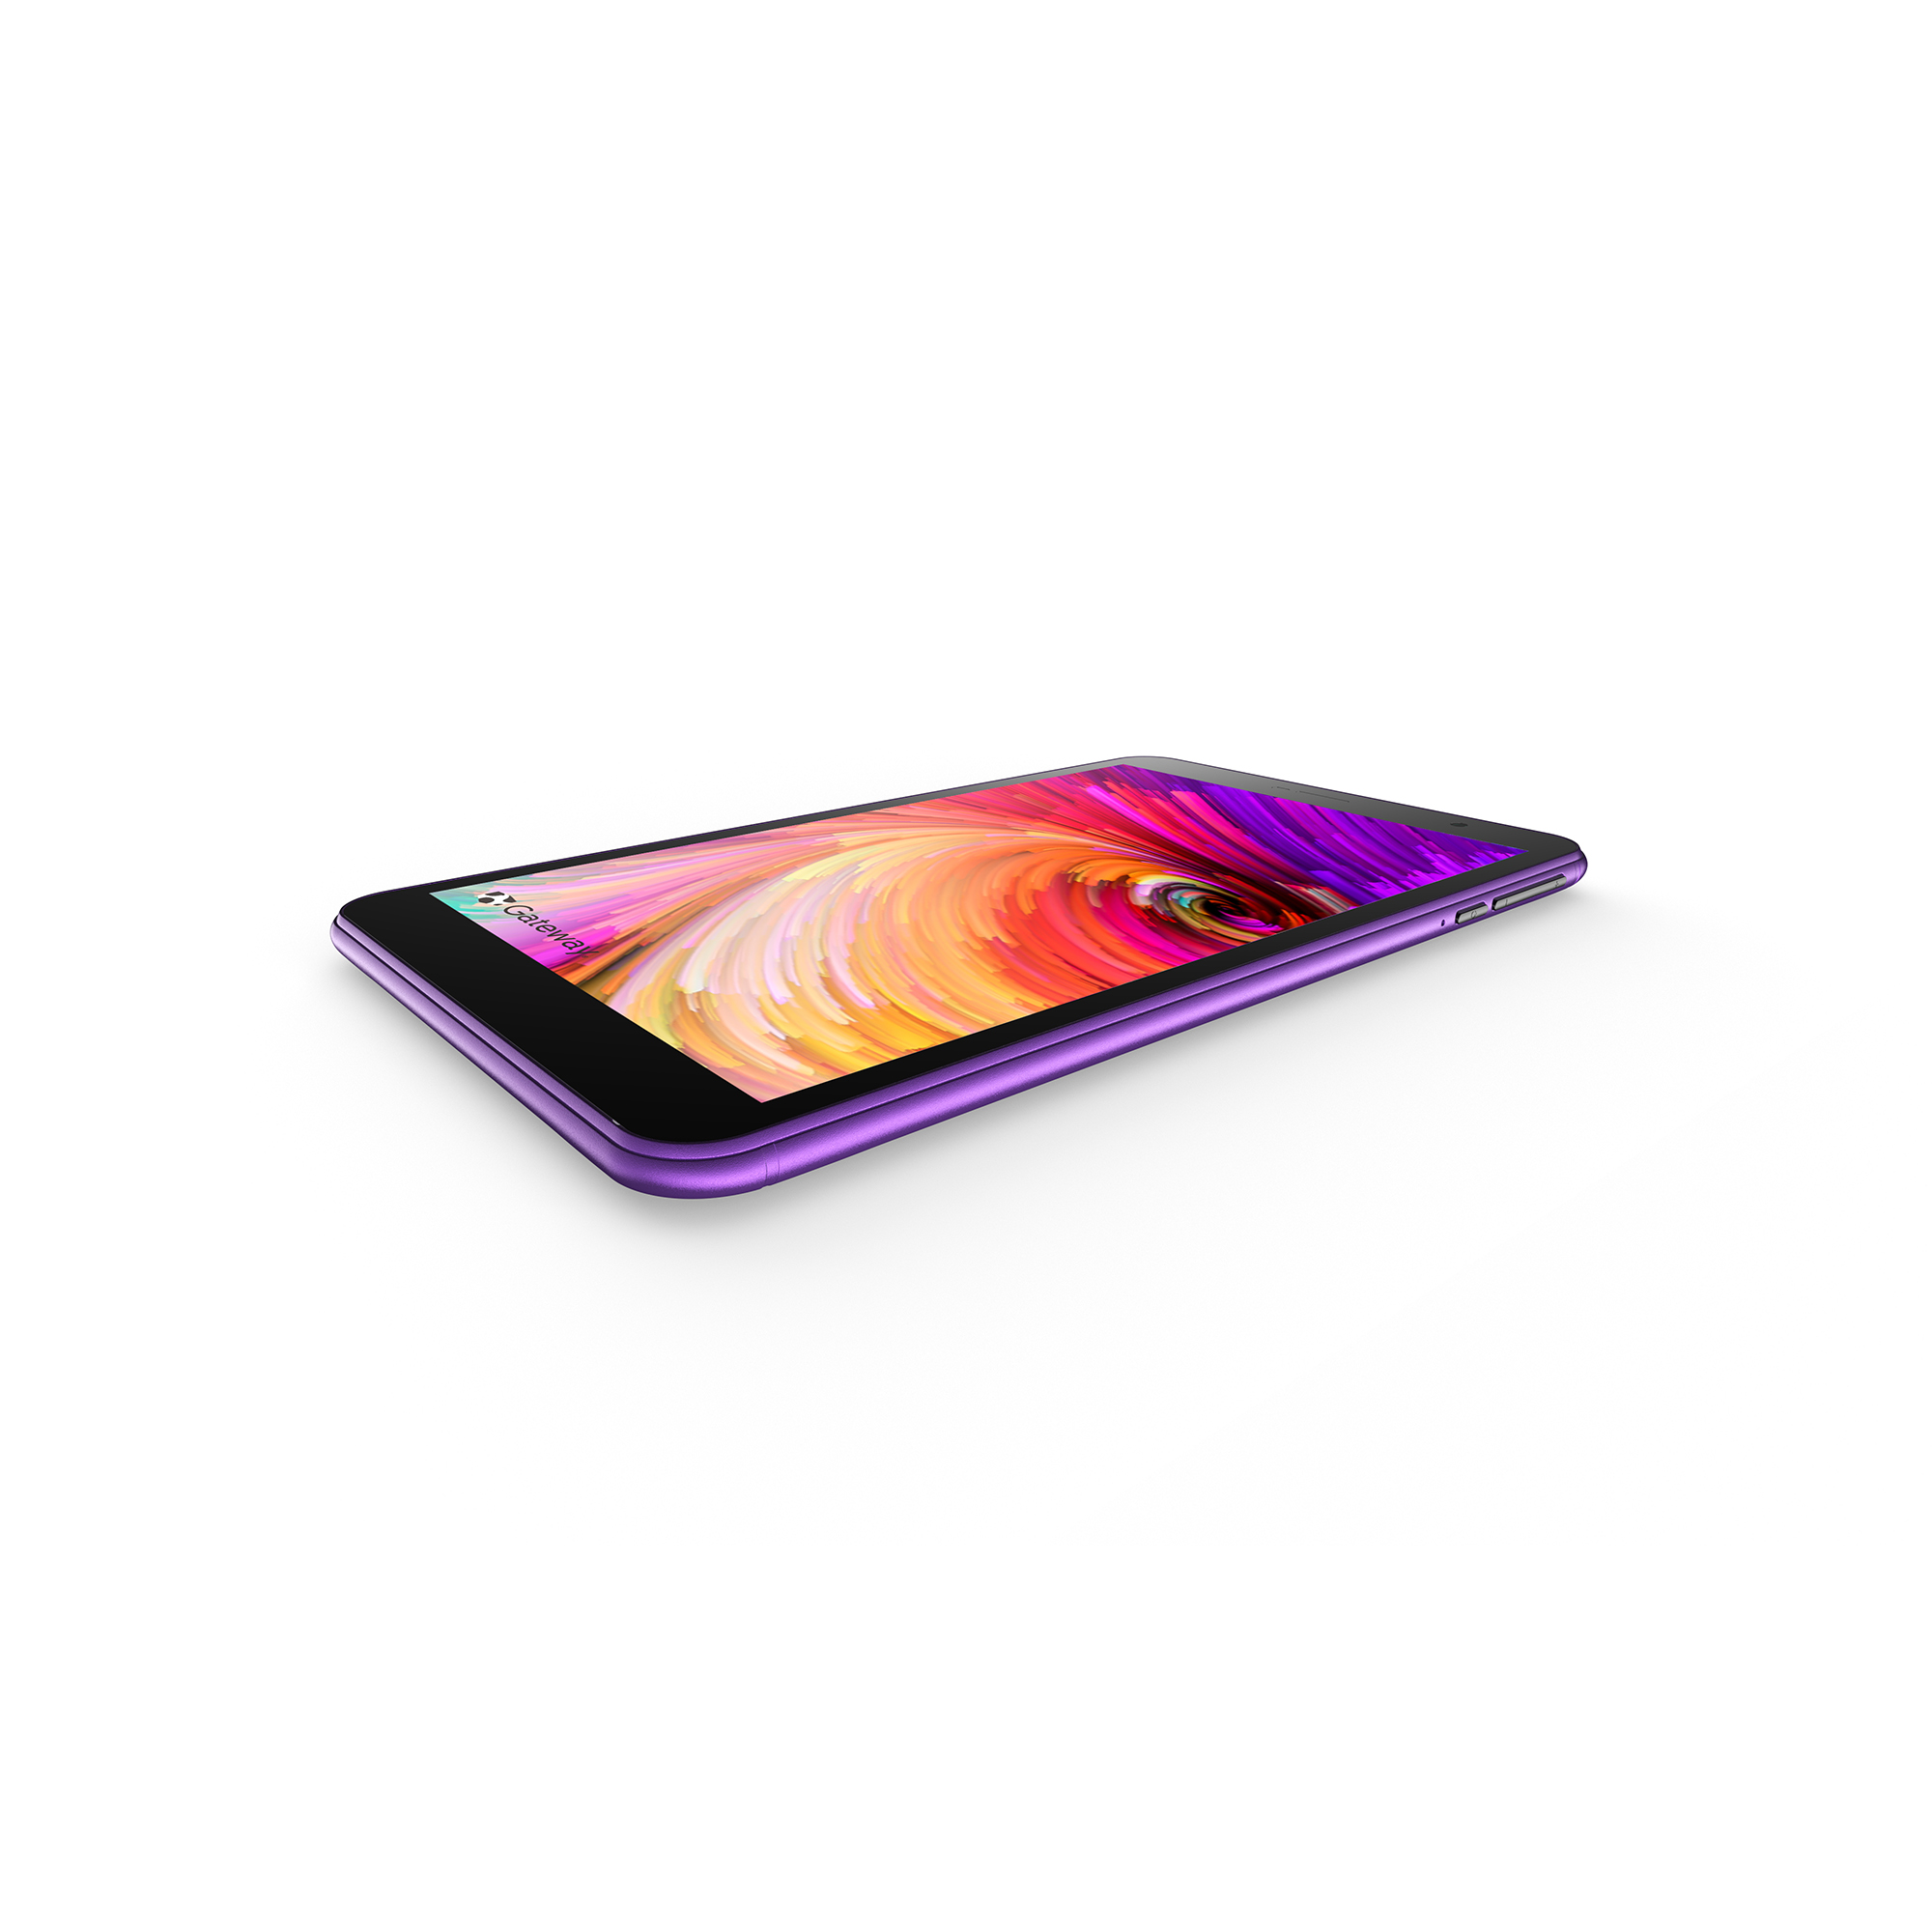 Gateway 8” Tablet, Quad Core, 32GB Storage, 2GB Memory, 0.3MP Front Camera, 2MP Rear Camera, USB-C, Sound ID, Android 10 Go Edition, Purple - image 5 of 5